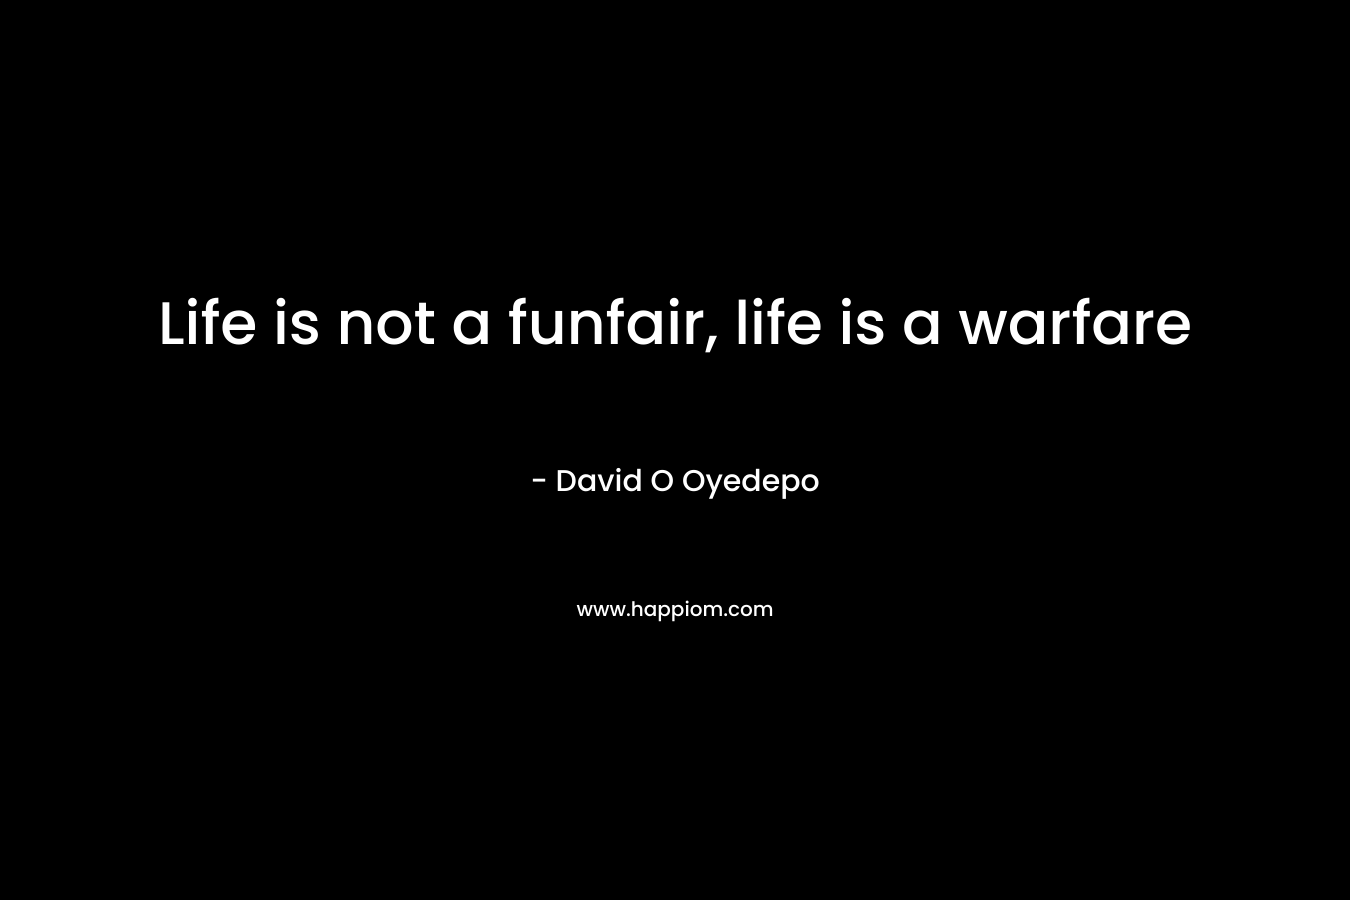 Life is not a funfair, life is a warfare